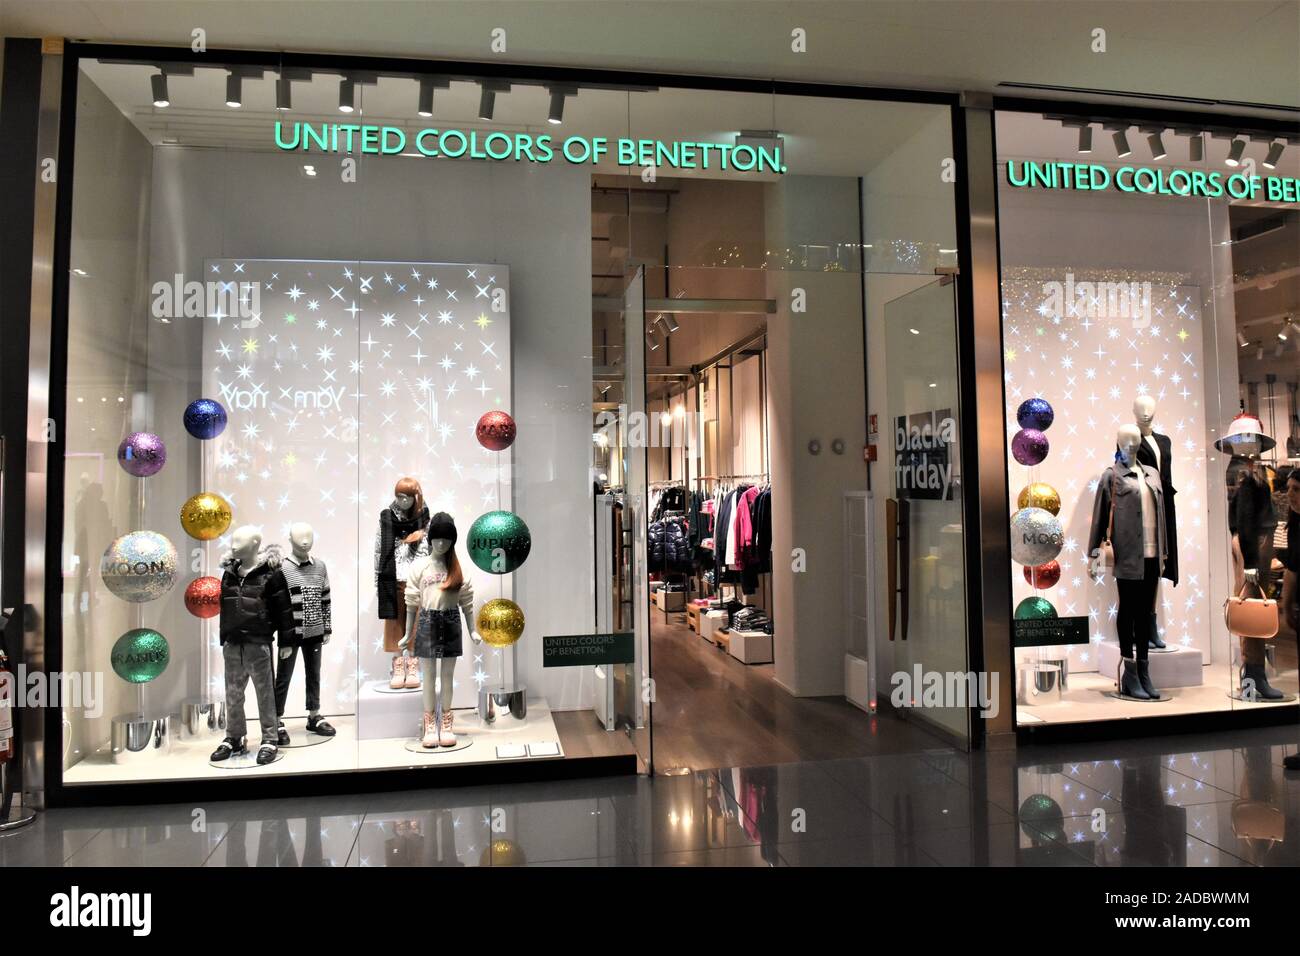 UNITED COLORS OF BENETTON FASHION STORE ENTRANCE IN EUROMA SHOPPING CENTER  IN ROME Stock Photo - Alamy